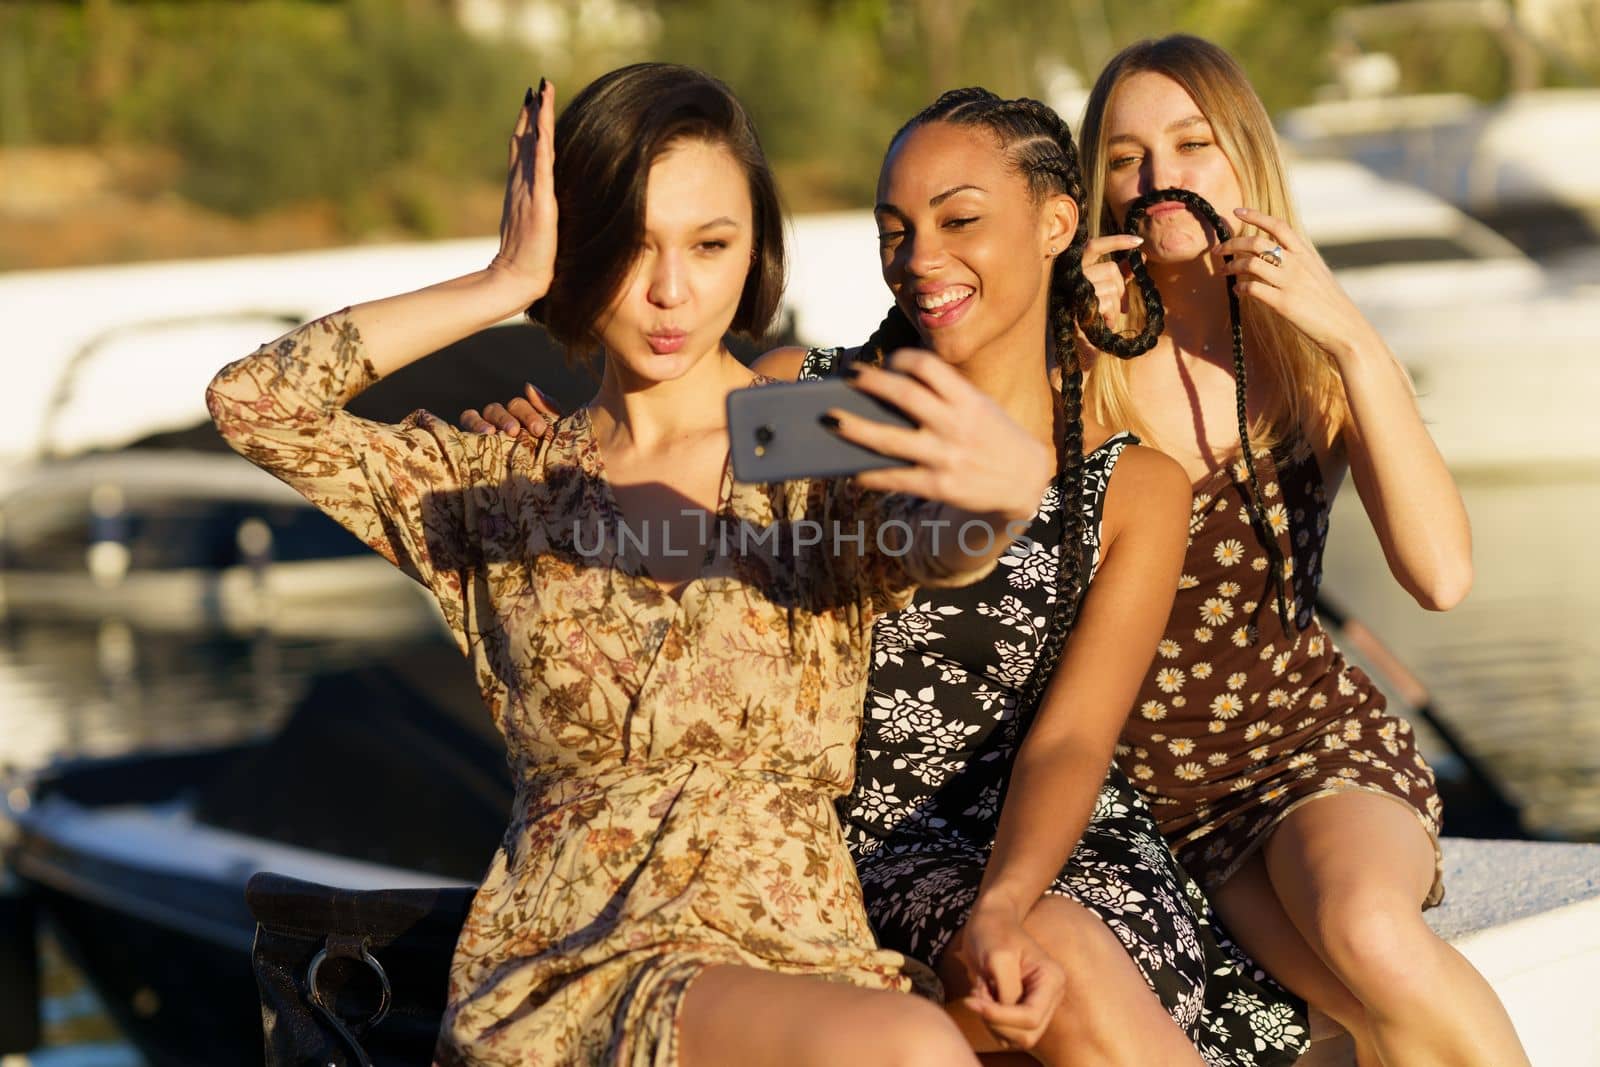 Delighted diverse female friends in dresses taking self portrait on smartphone while sitting together in wharf near river with boats